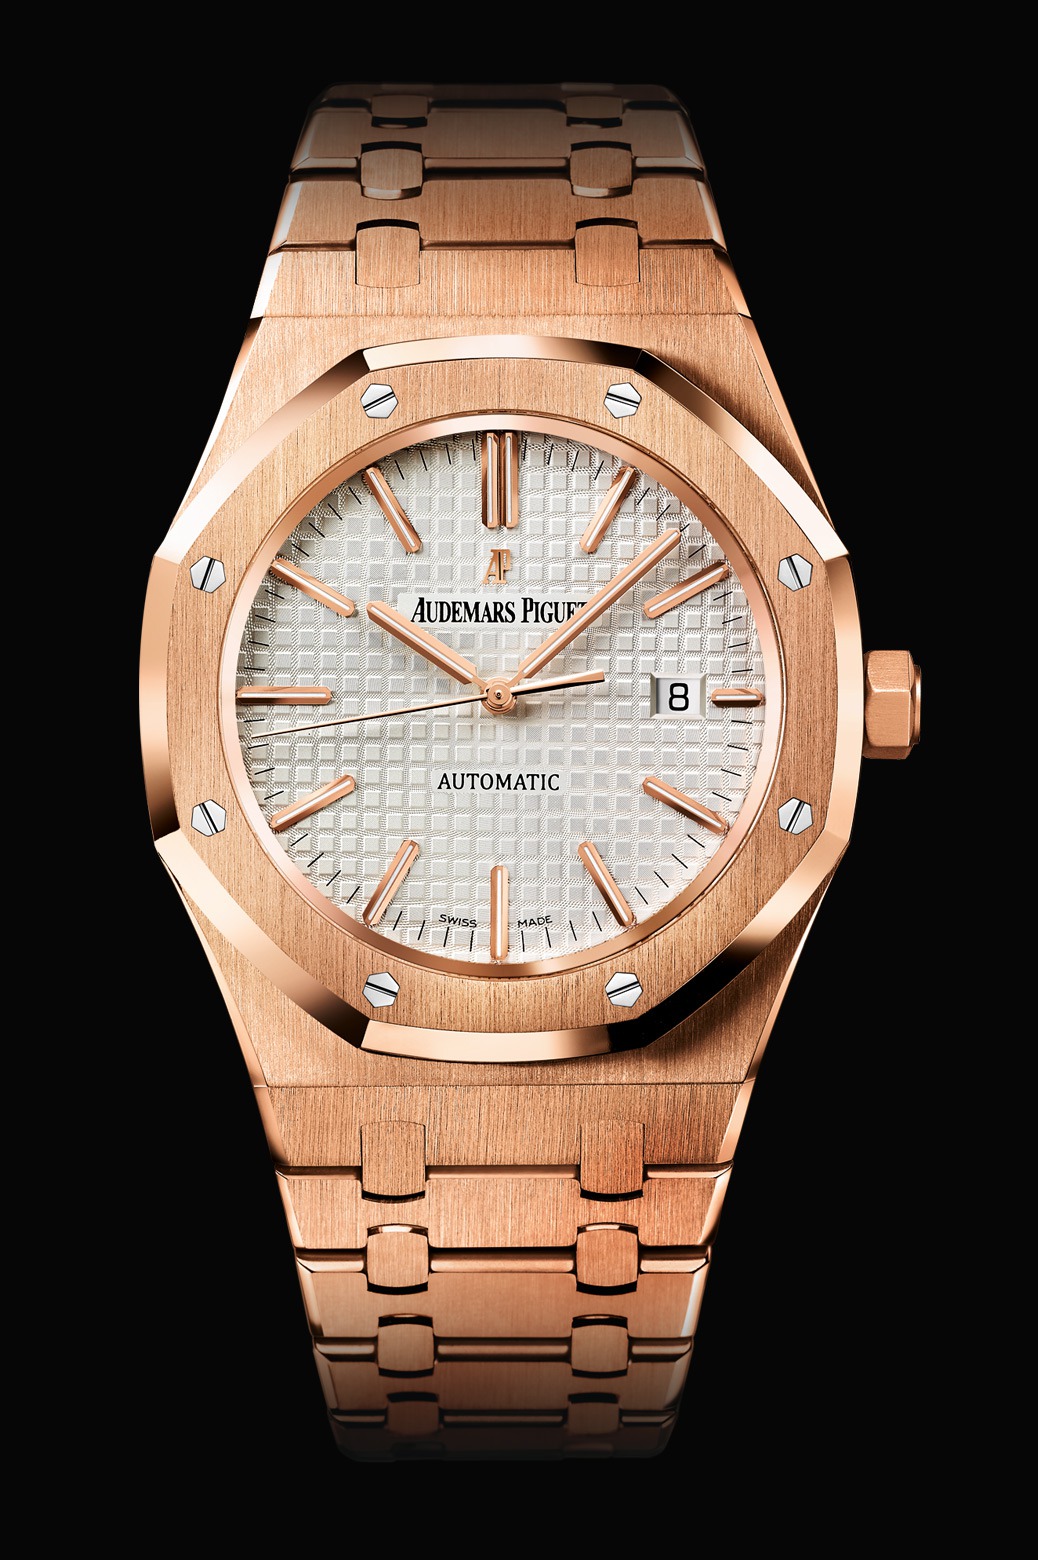 Audemars Piguet Royal Oak Automatic Pink Gold watch REF: 15400OR.OO.1220OR.02